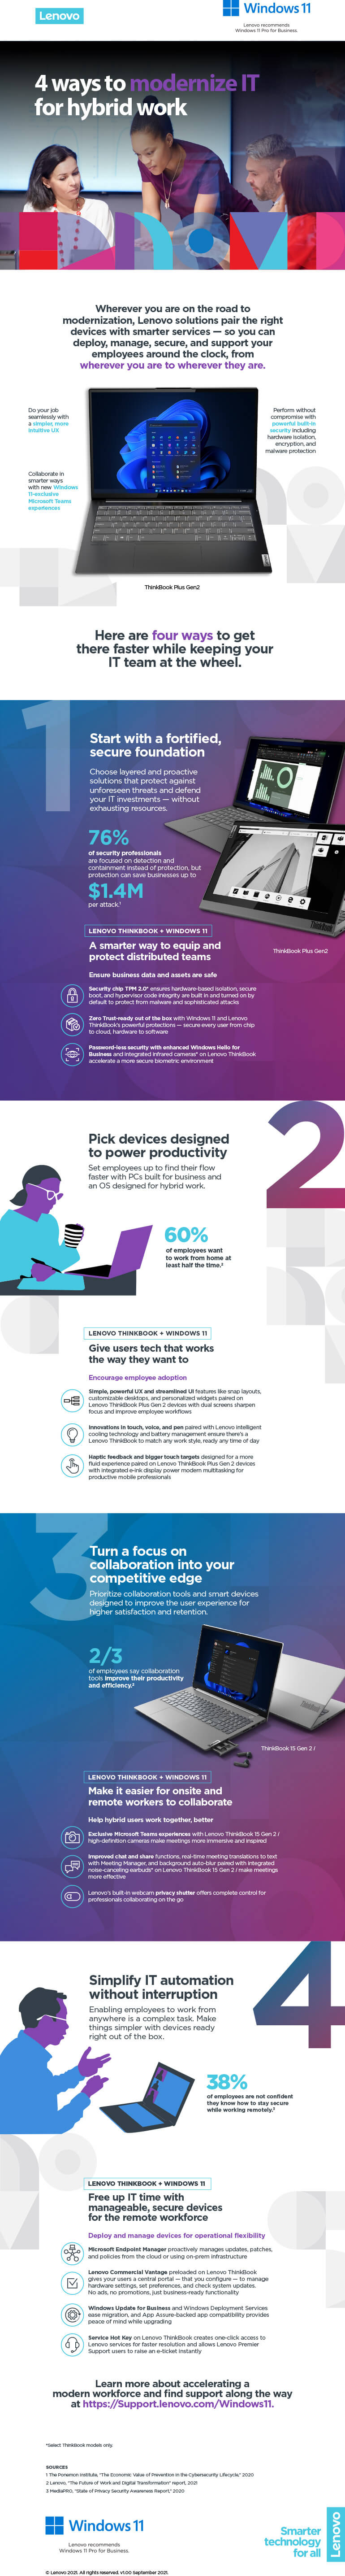 4 Ways to Modernize IT for Hybrid Work infographic translated below.